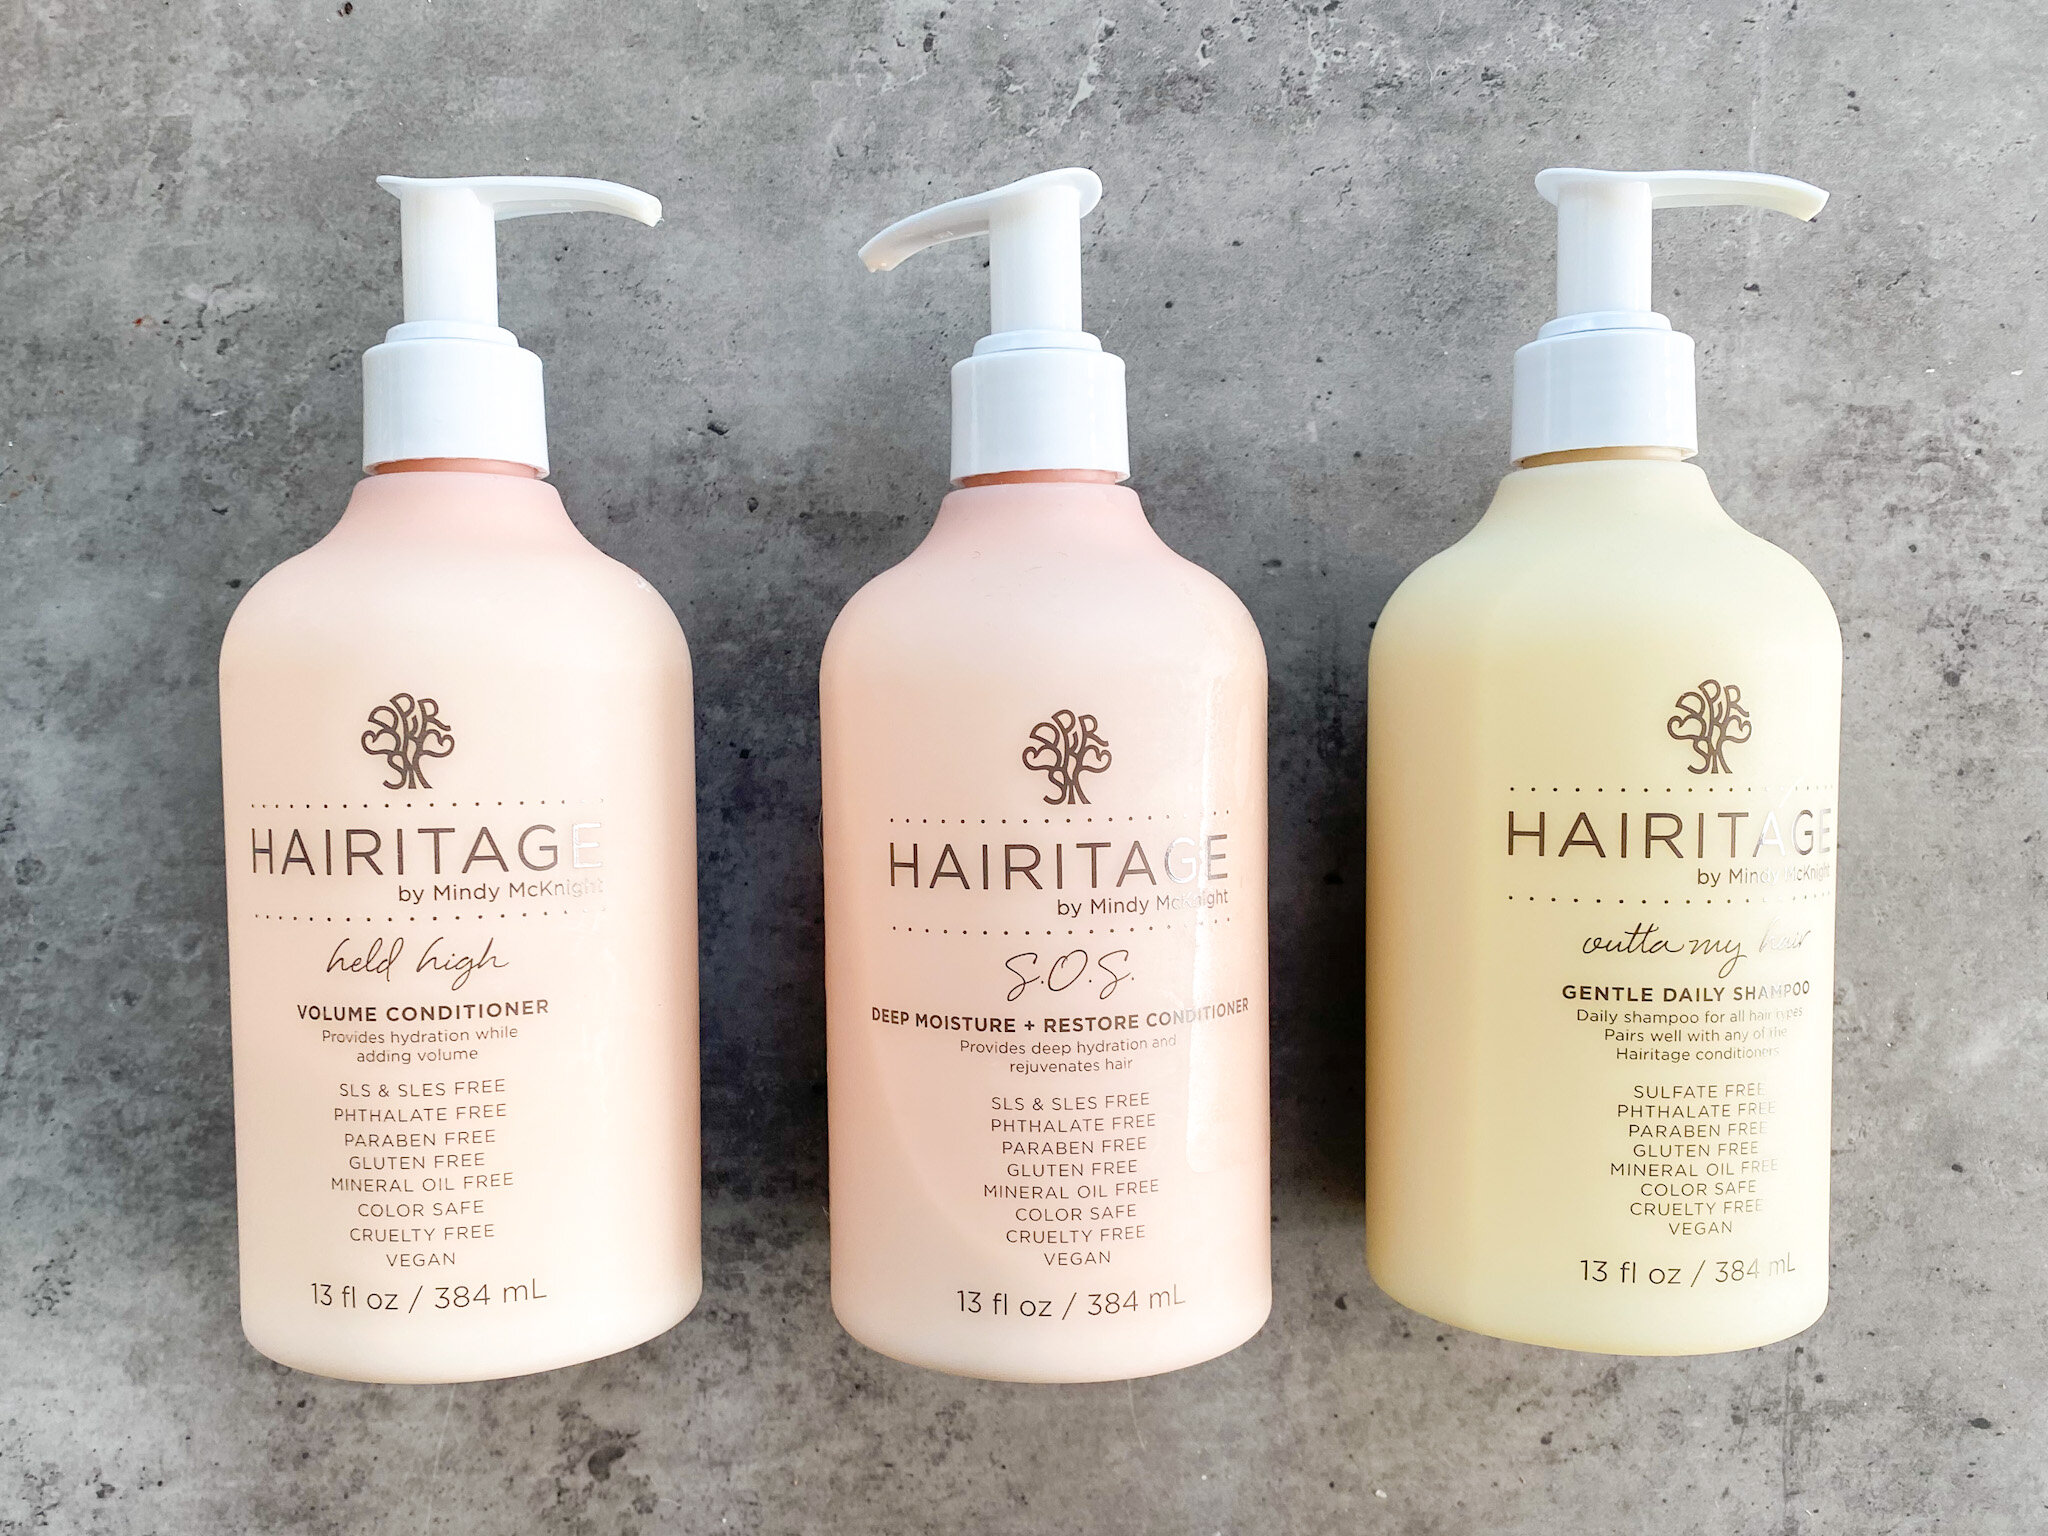 www.tarynintotravel.com | Hairitage by Mindy Hairline | Shampoo and Conditioner Review | Dry Shampoo | An apple a day acv hair rinse | Walmart Finds 